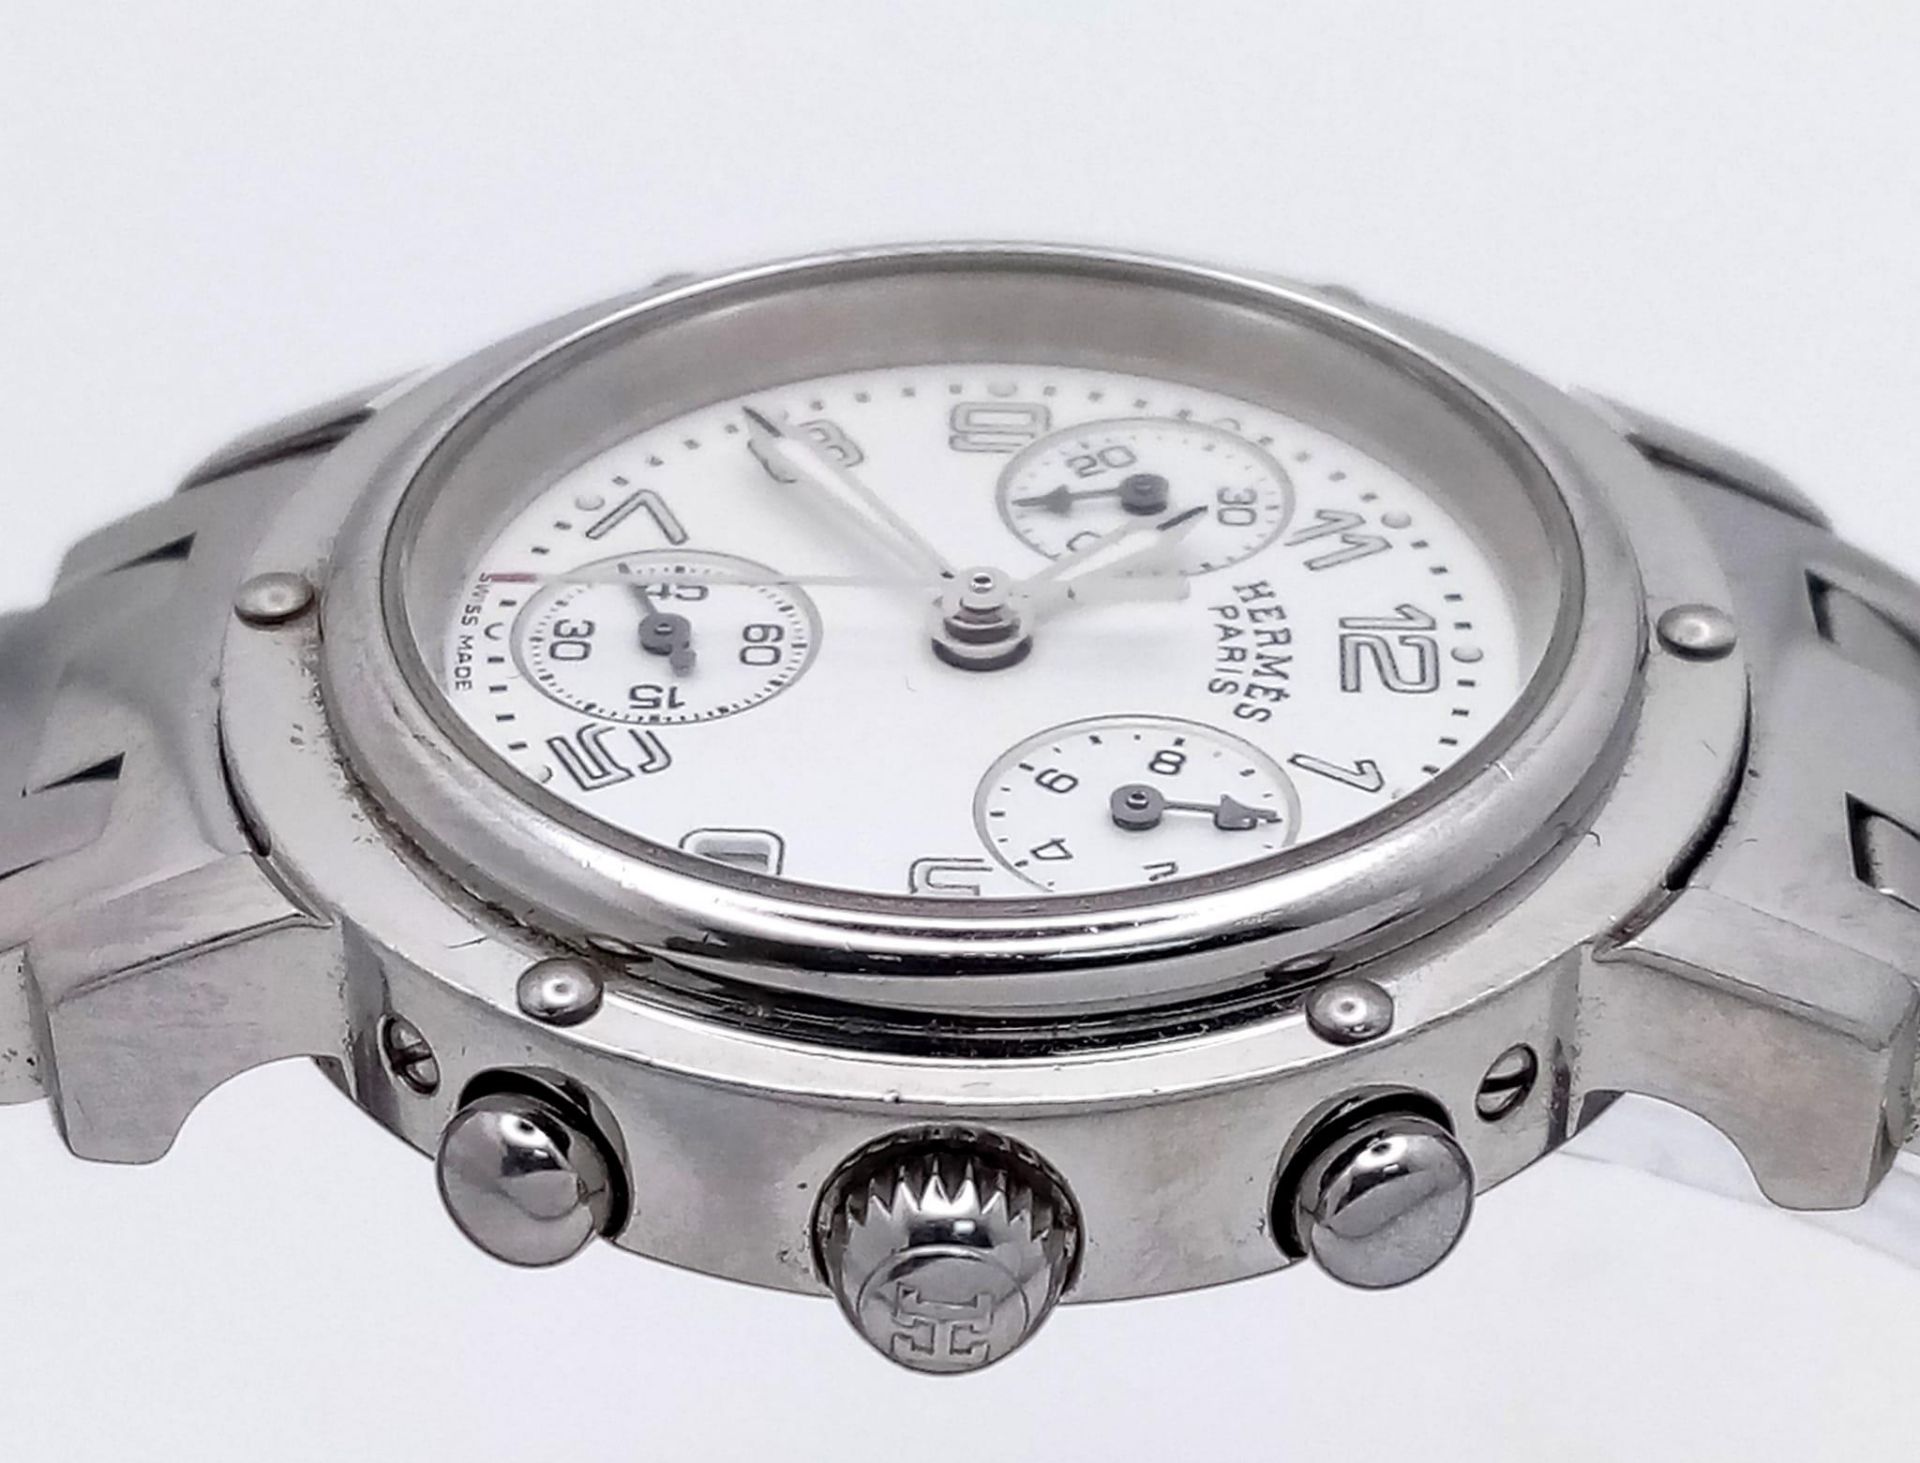 A "HERMES" OF PARIS STAINLESS STEEL CHRONOGRAPH LADIES WATCH WITH 3 SUBDIALS , DATE BOX AND WHITE - Image 5 of 8